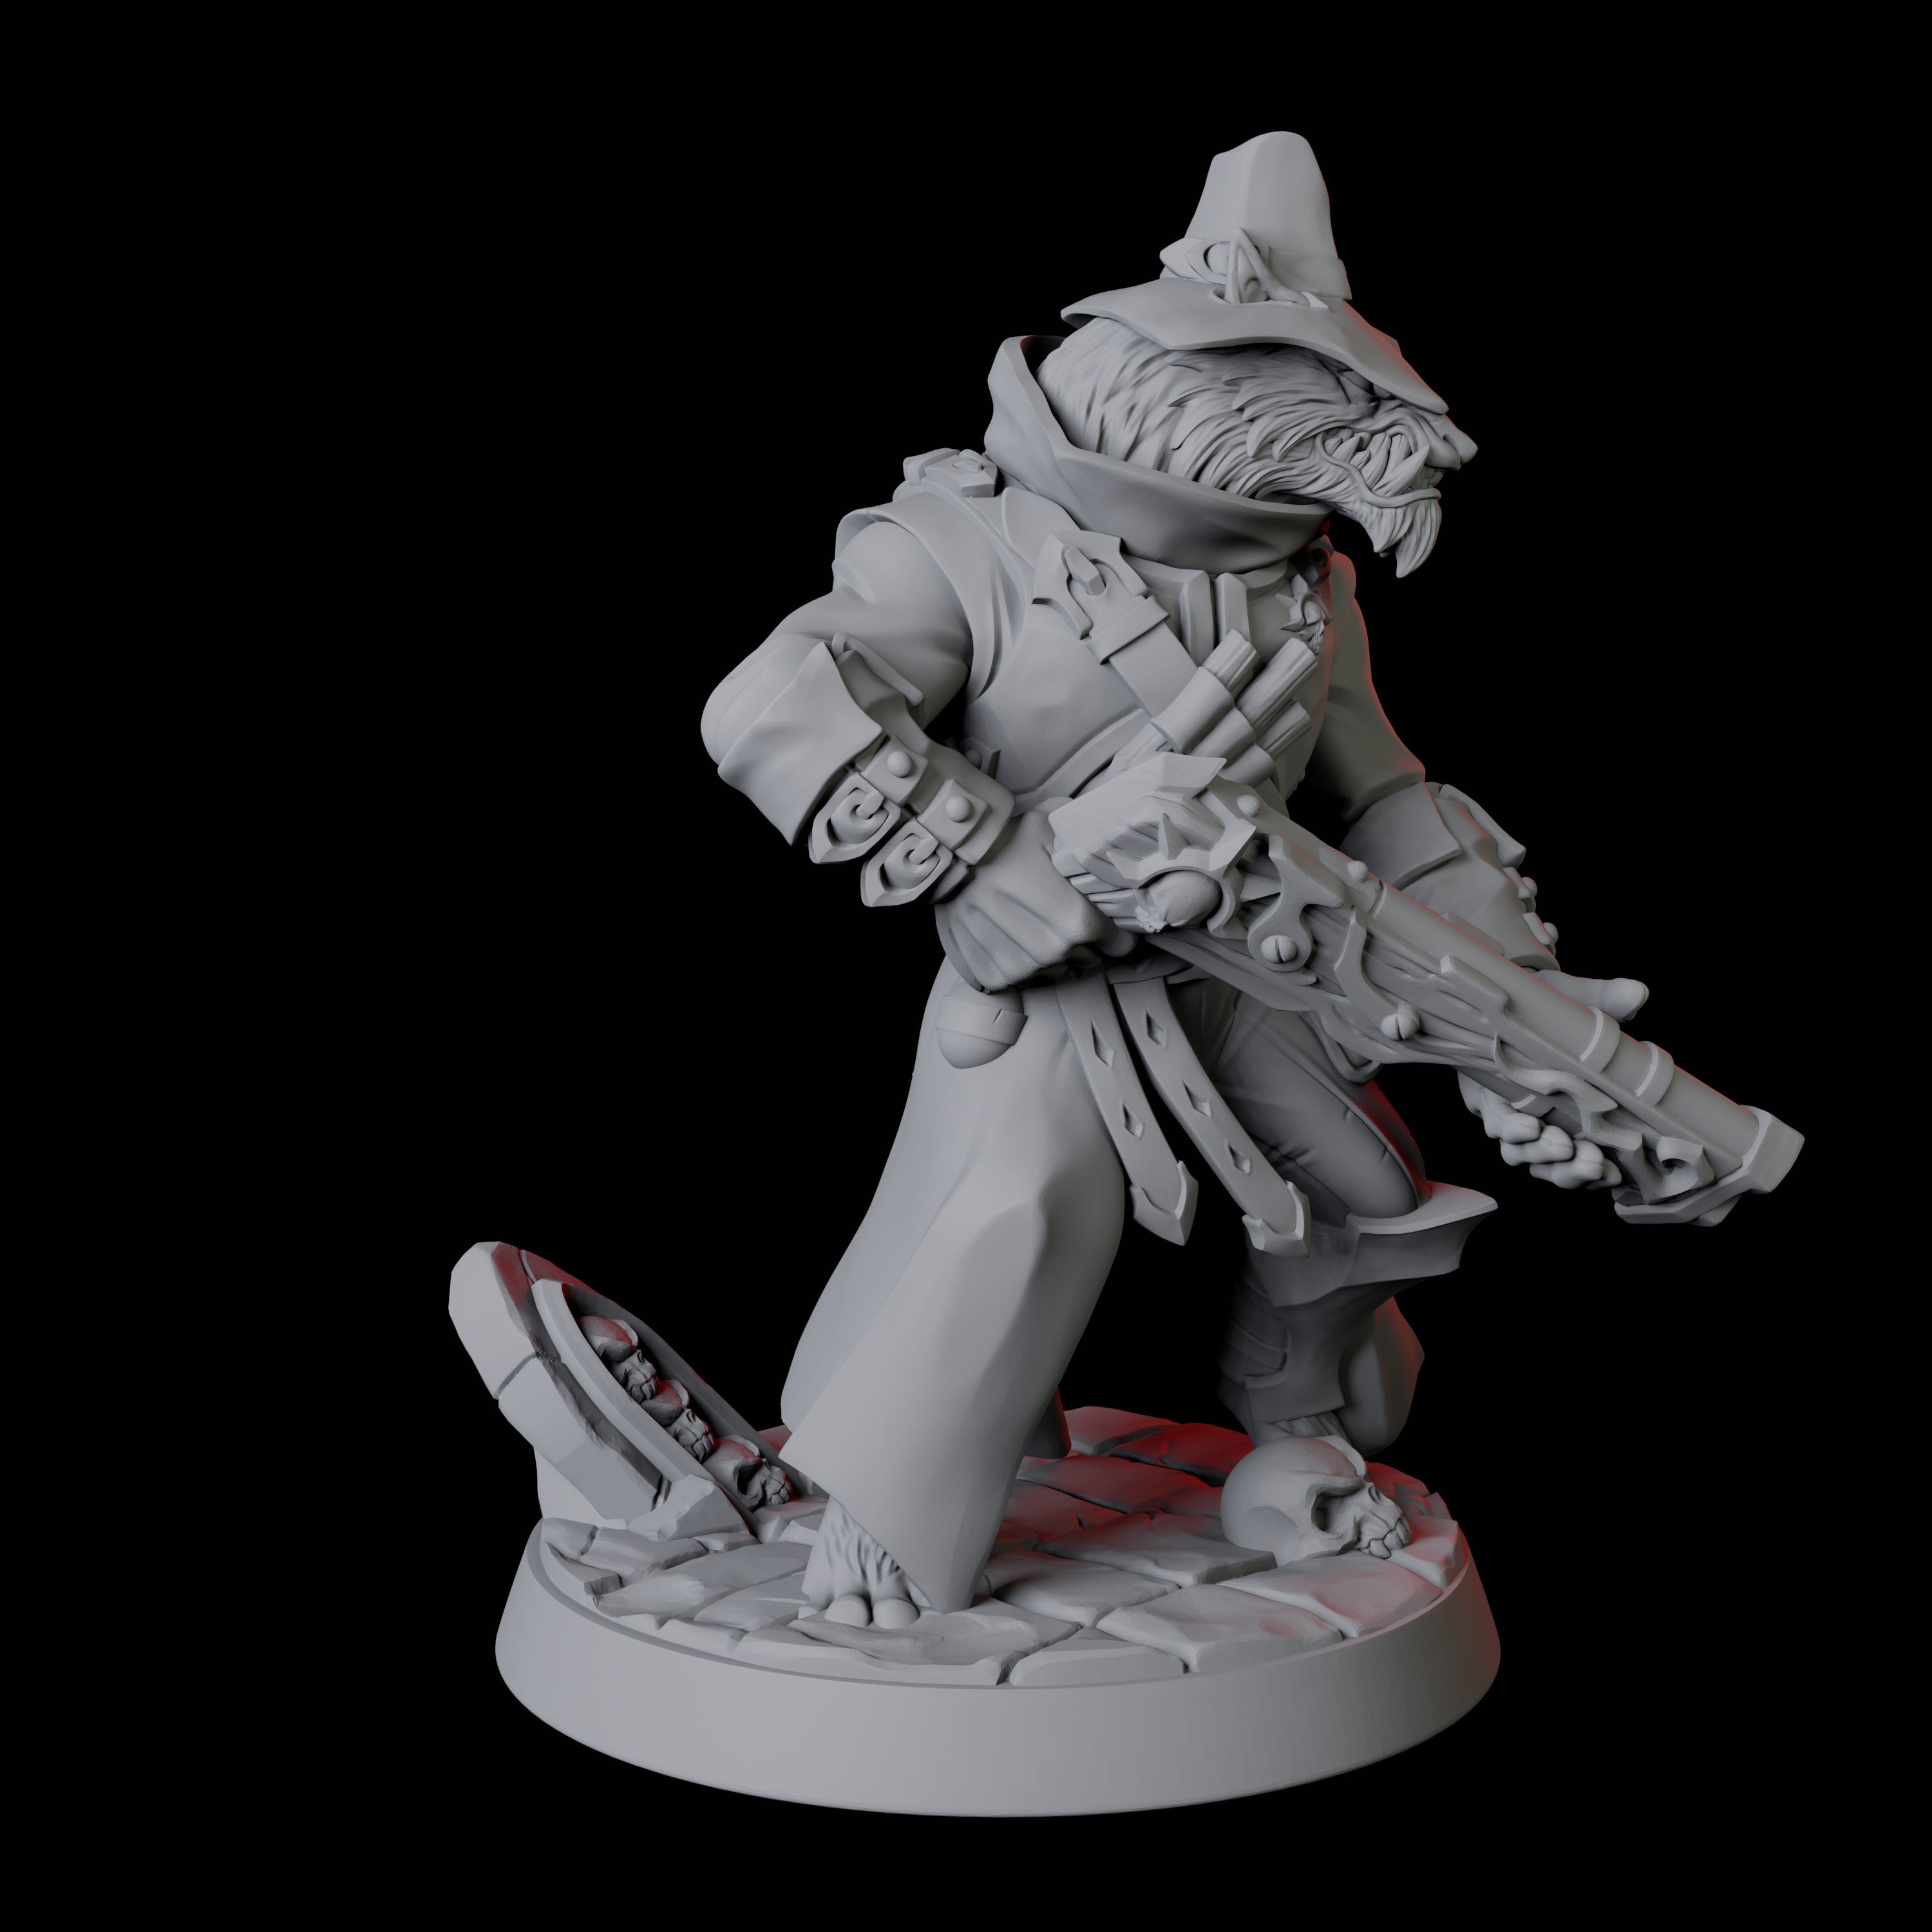 Werewolf Vampire Hunter B Miniature for Dungeons and Dragons, Pathfinder or other TTRPGs